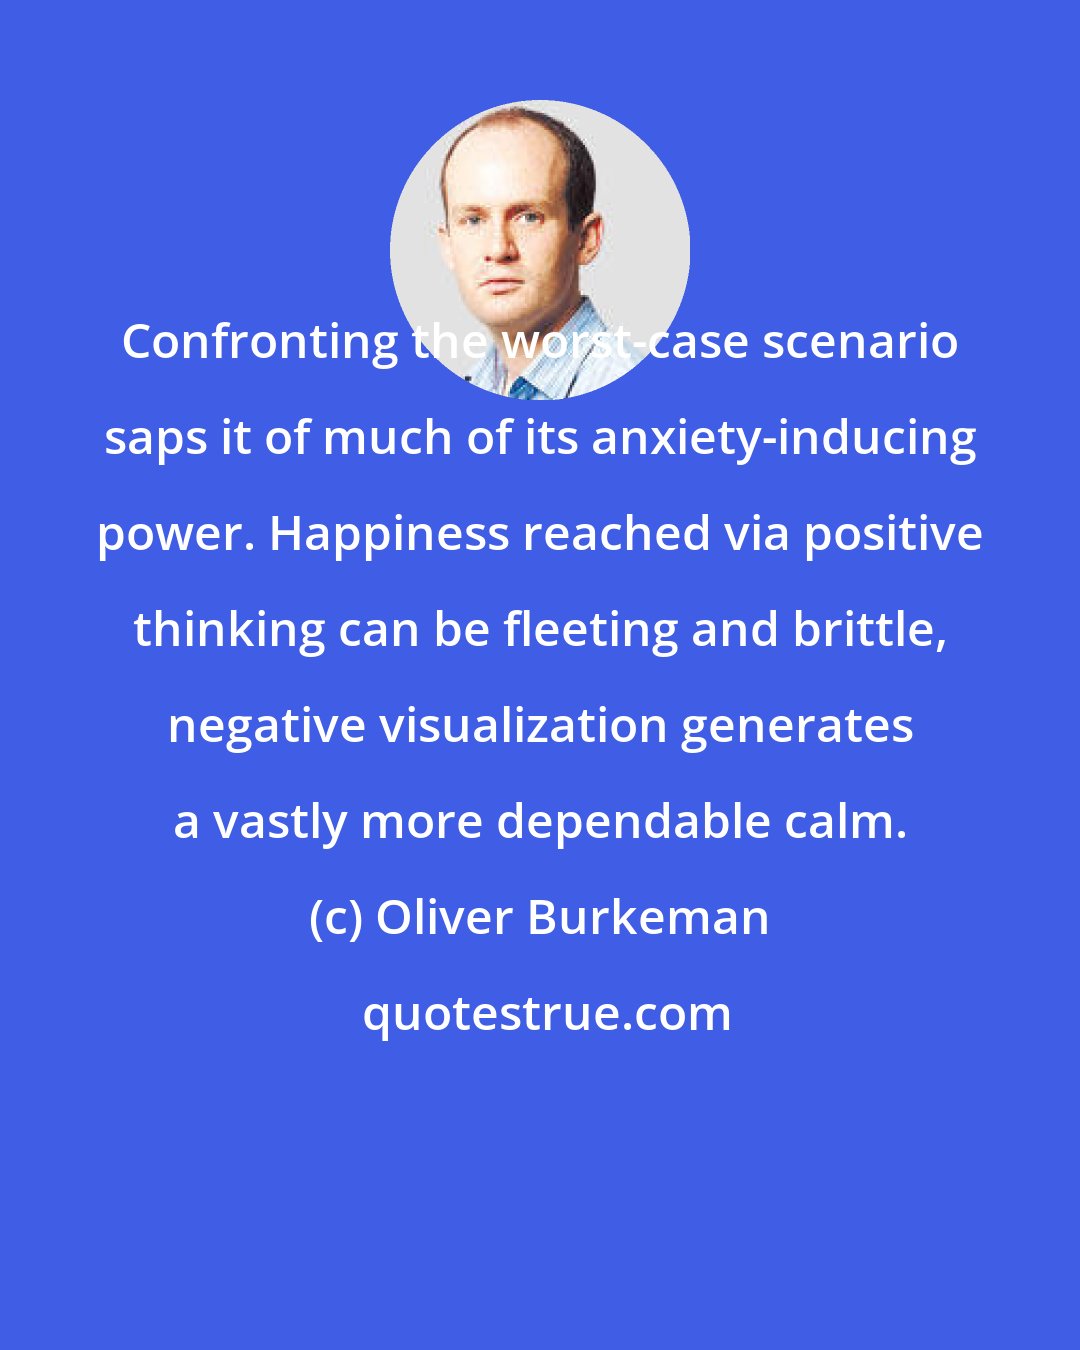 Oliver Burkeman: Confronting the worst-case scenario saps it of much of its anxiety-inducing power. Happiness reached via positive thinking can be fleeting and brittle, negative visualization generates a vastly more dependable calm.